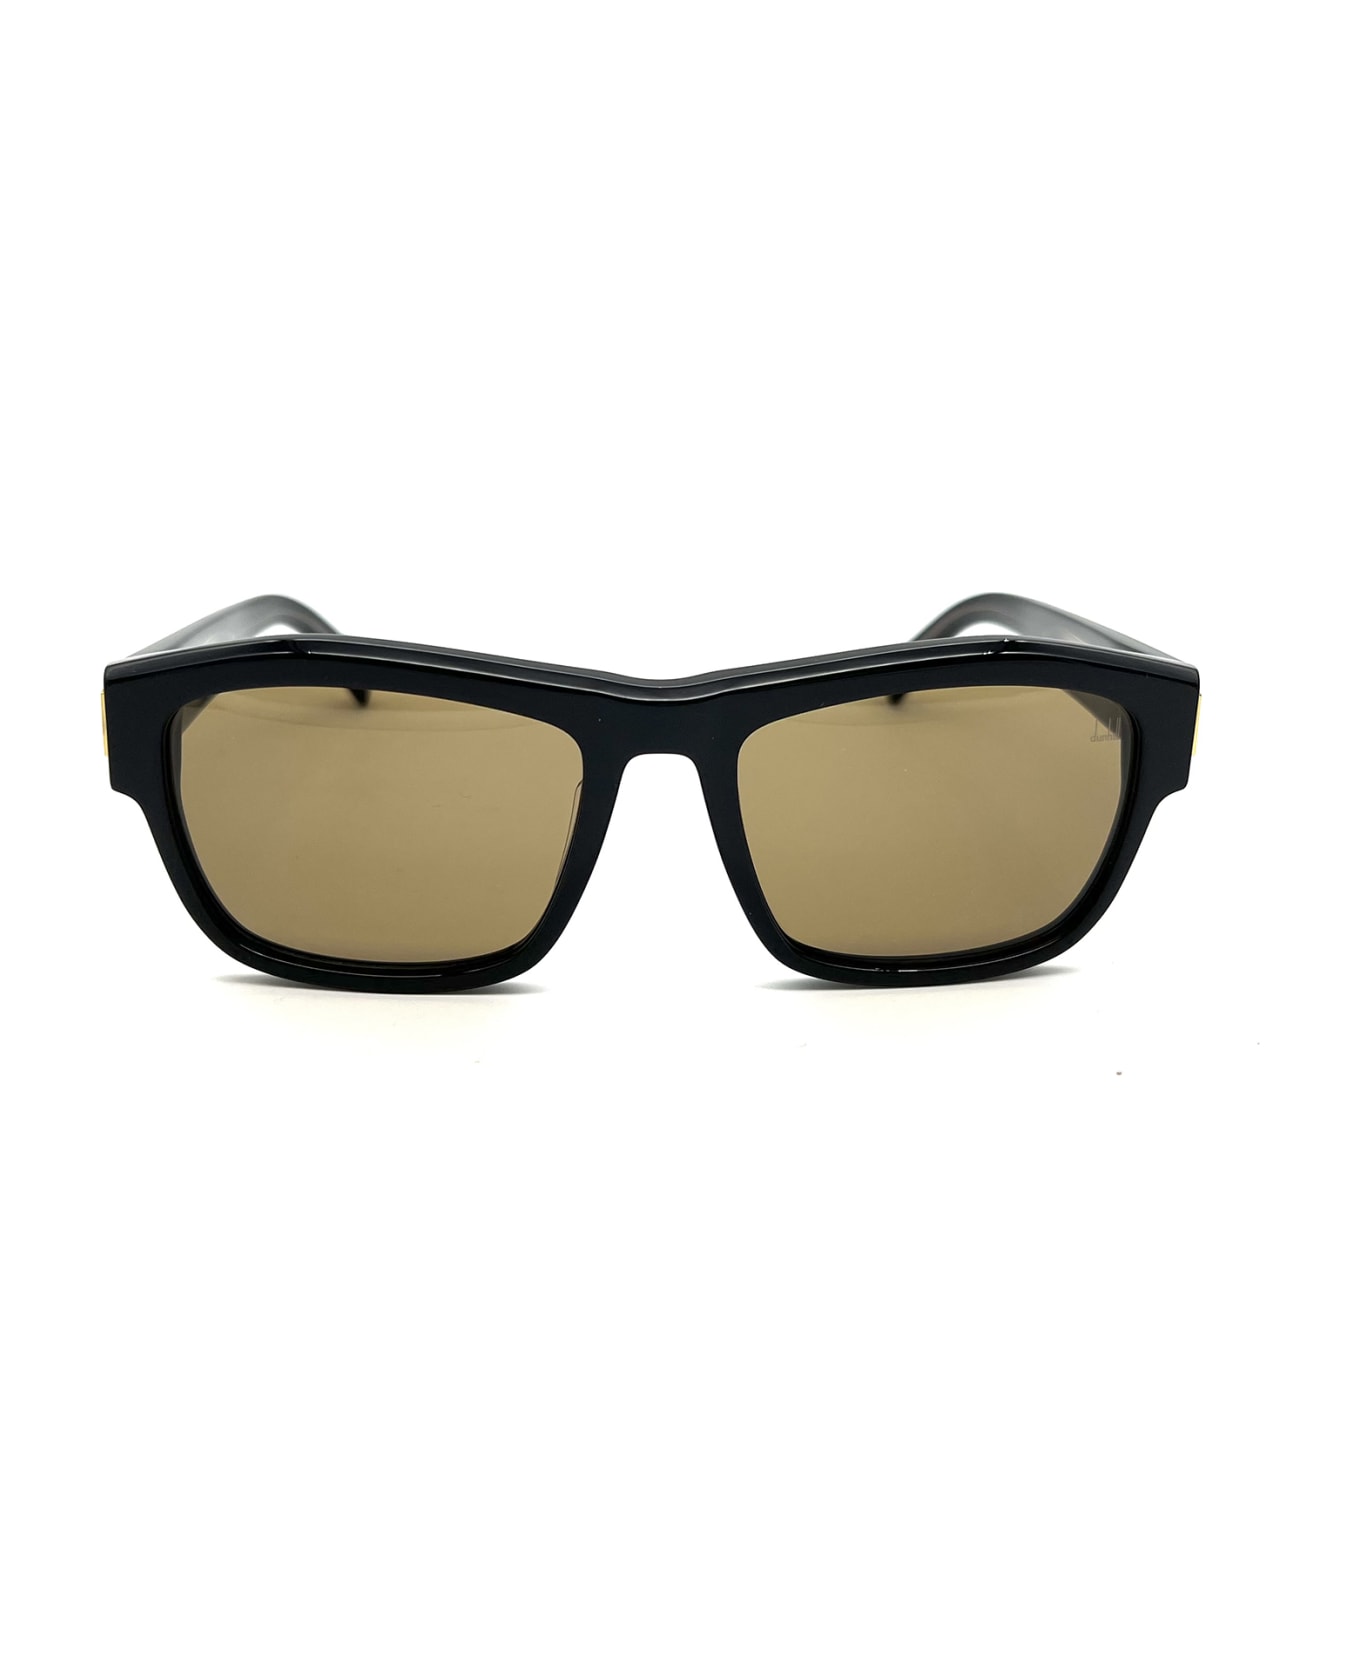 Dunhill DU0029S Sunglasses - Introducing the Model 5 sunglasses